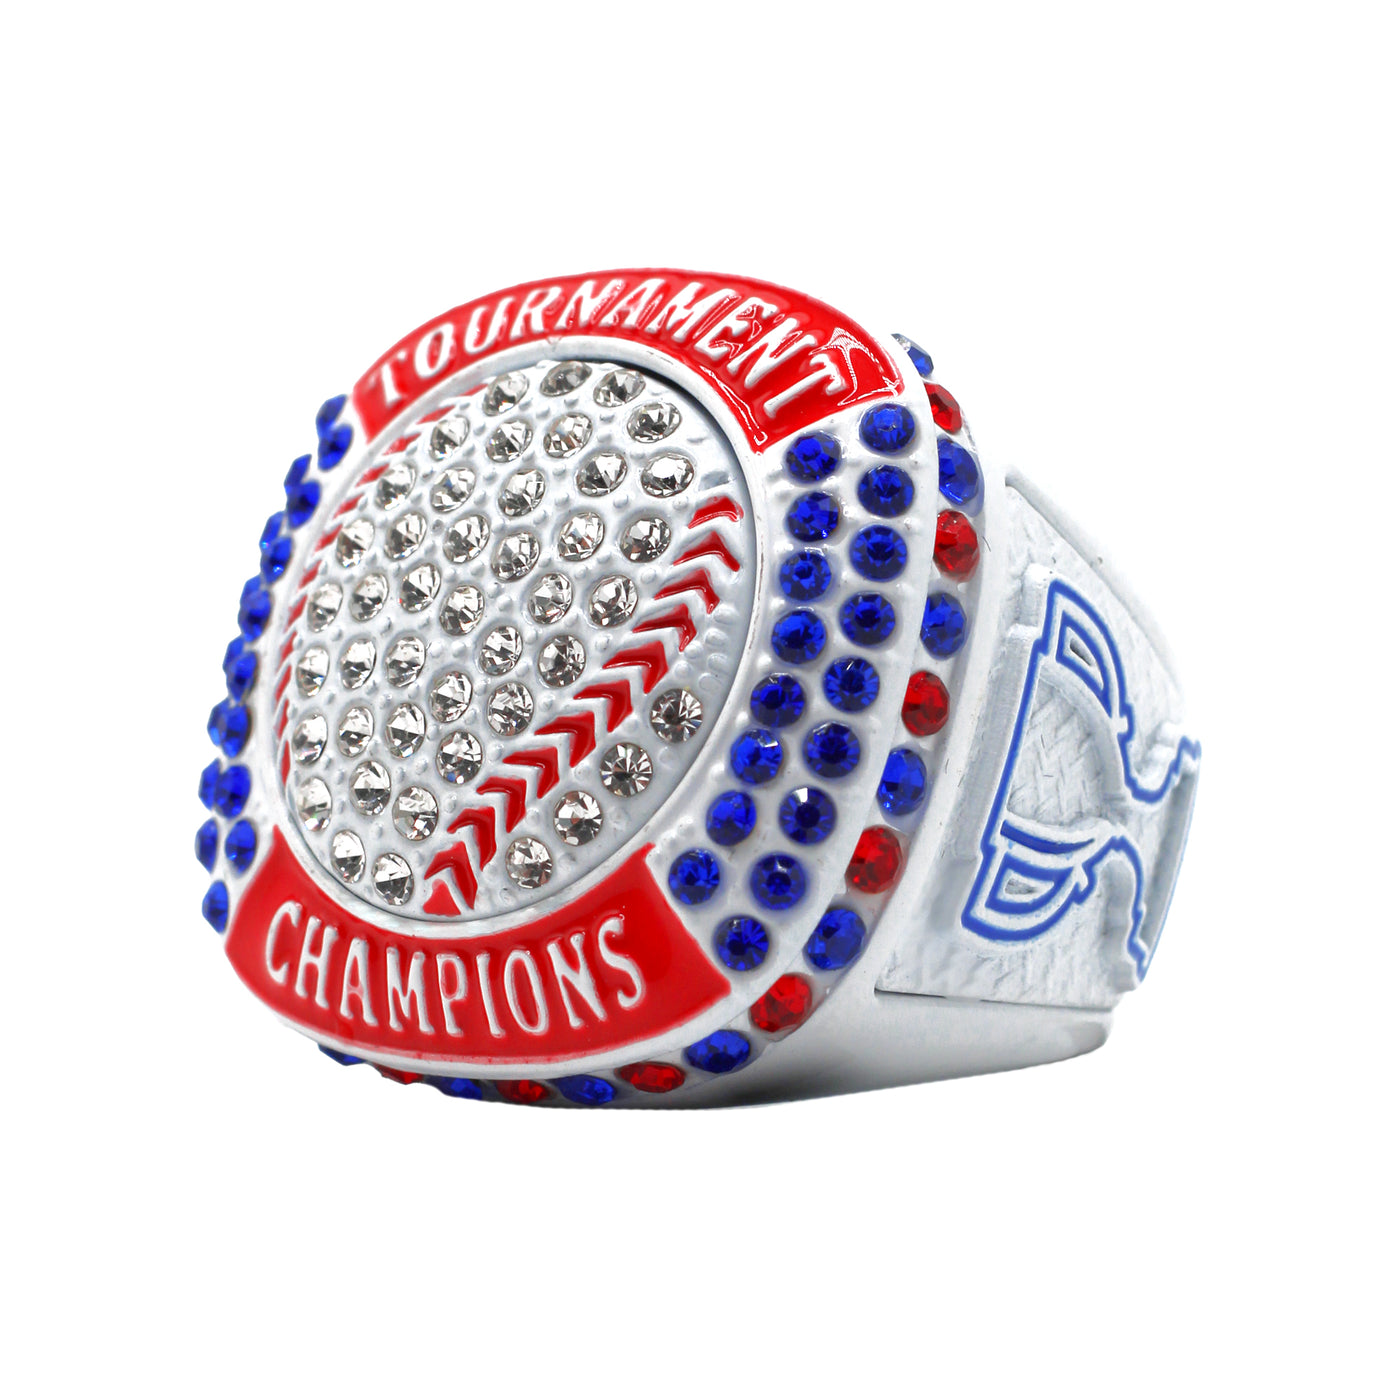 GEN5™ WHITEOUT2 TOURNAMENT CHAMPIONS RING